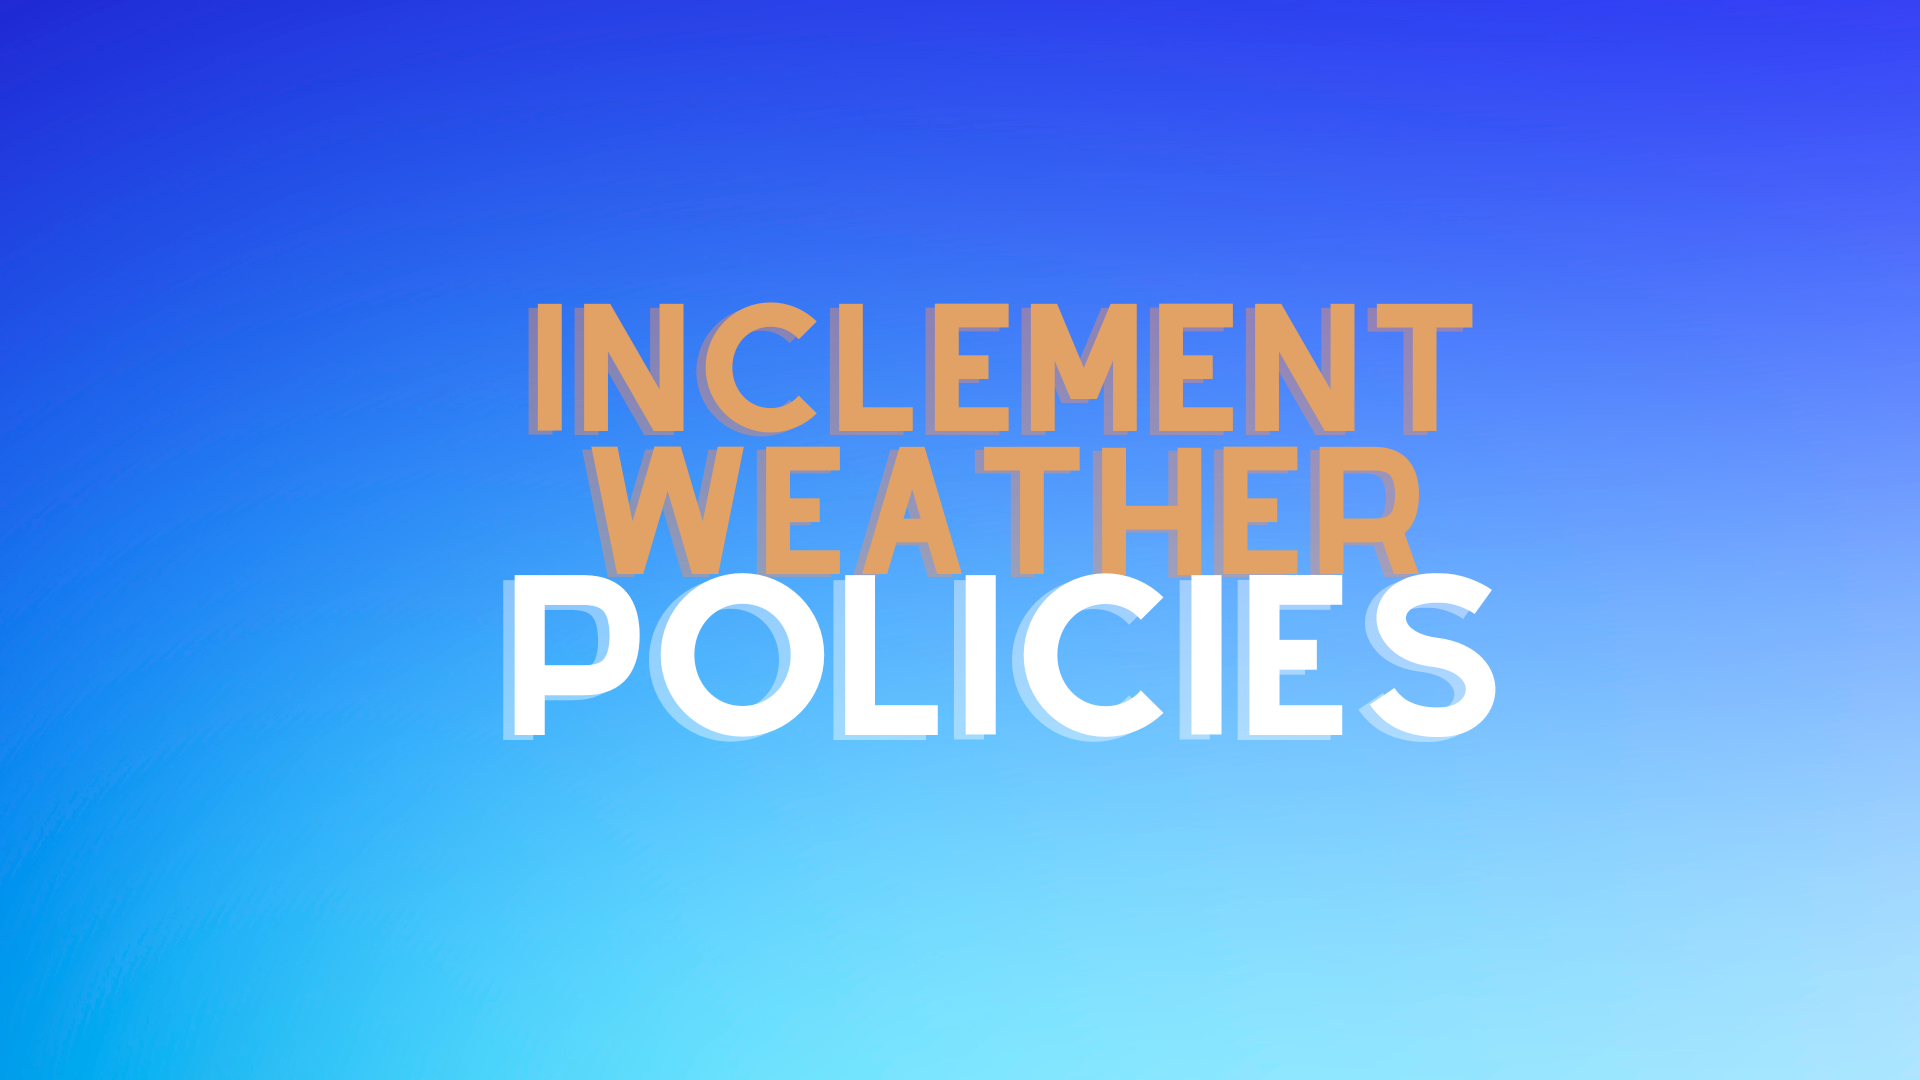 https://www.lcps.net/page/inclement-weather-policies